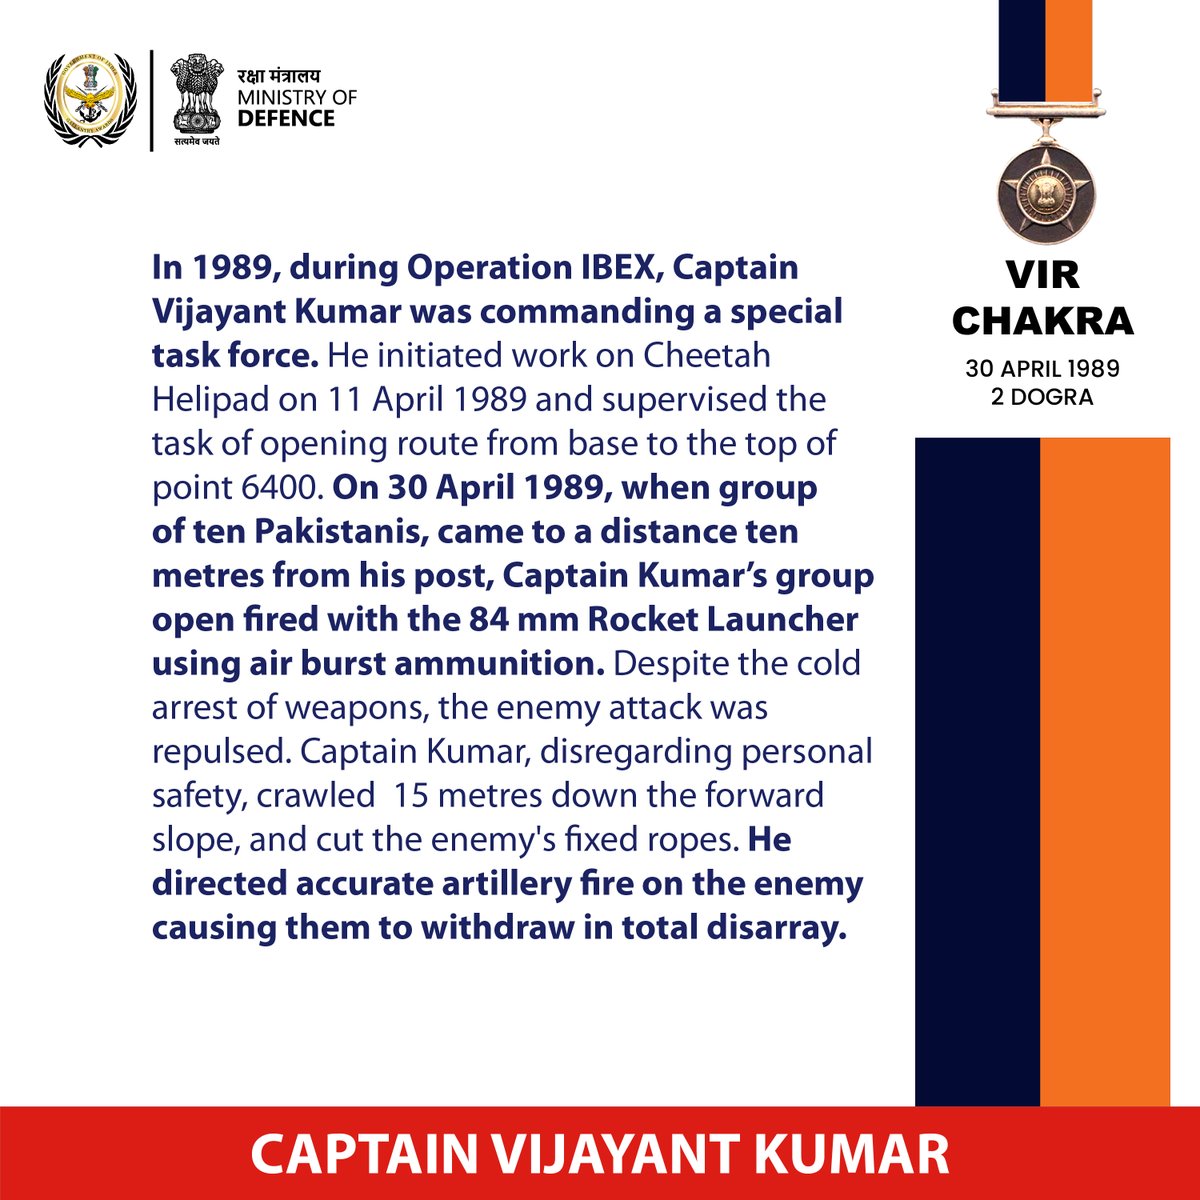 Captain Vijayant Kumar, 2 DOGRA was deployed at #Siachen. He displayed conspicuous courage and outstanding junior leadership during an operation to occupy Point 6400 on the Saltoro Watershed. For his act, he was awarded #VirChakra on 30 April 1989.

@adgpi 
@Salute2souldier